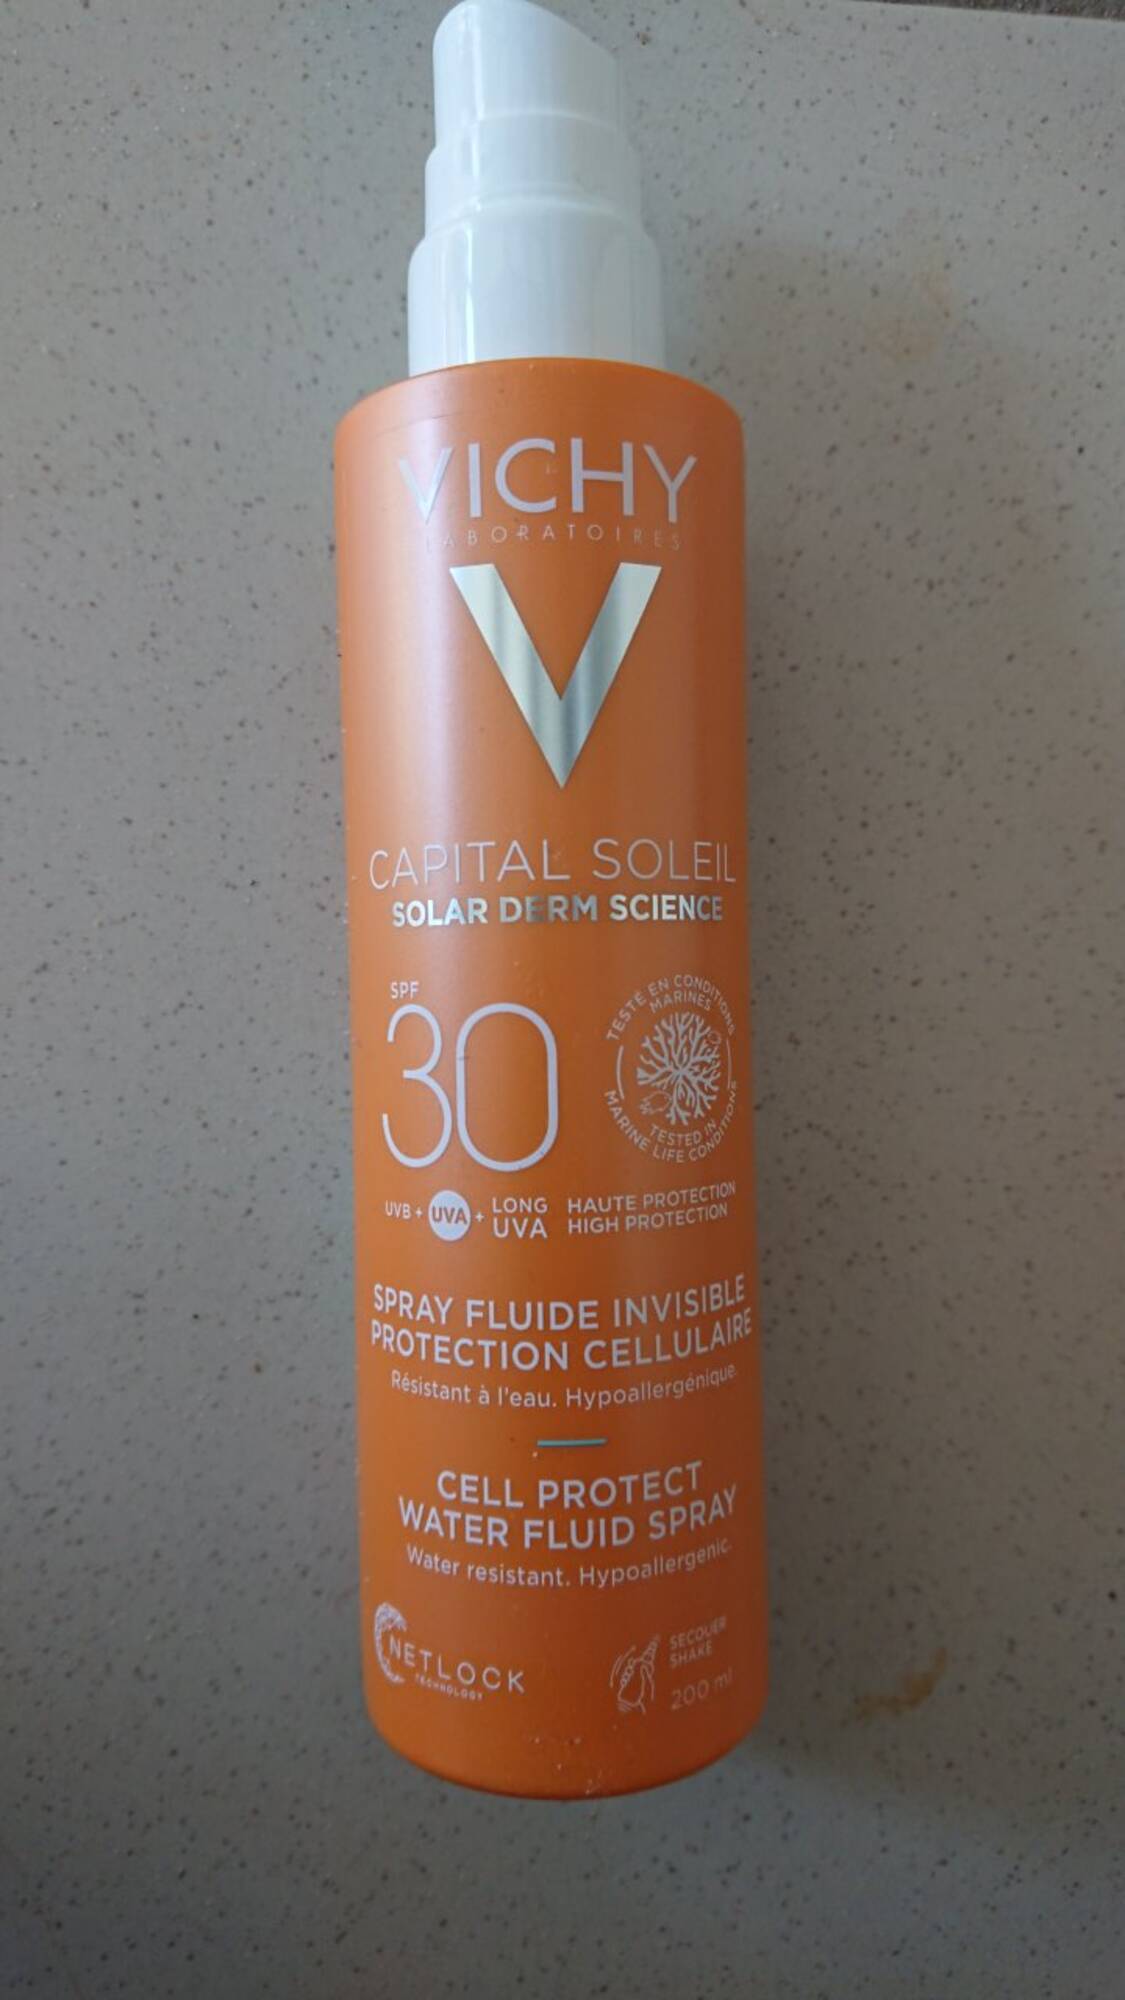 VICHY - Capital soleil - Spray fluide invisible SPF 30